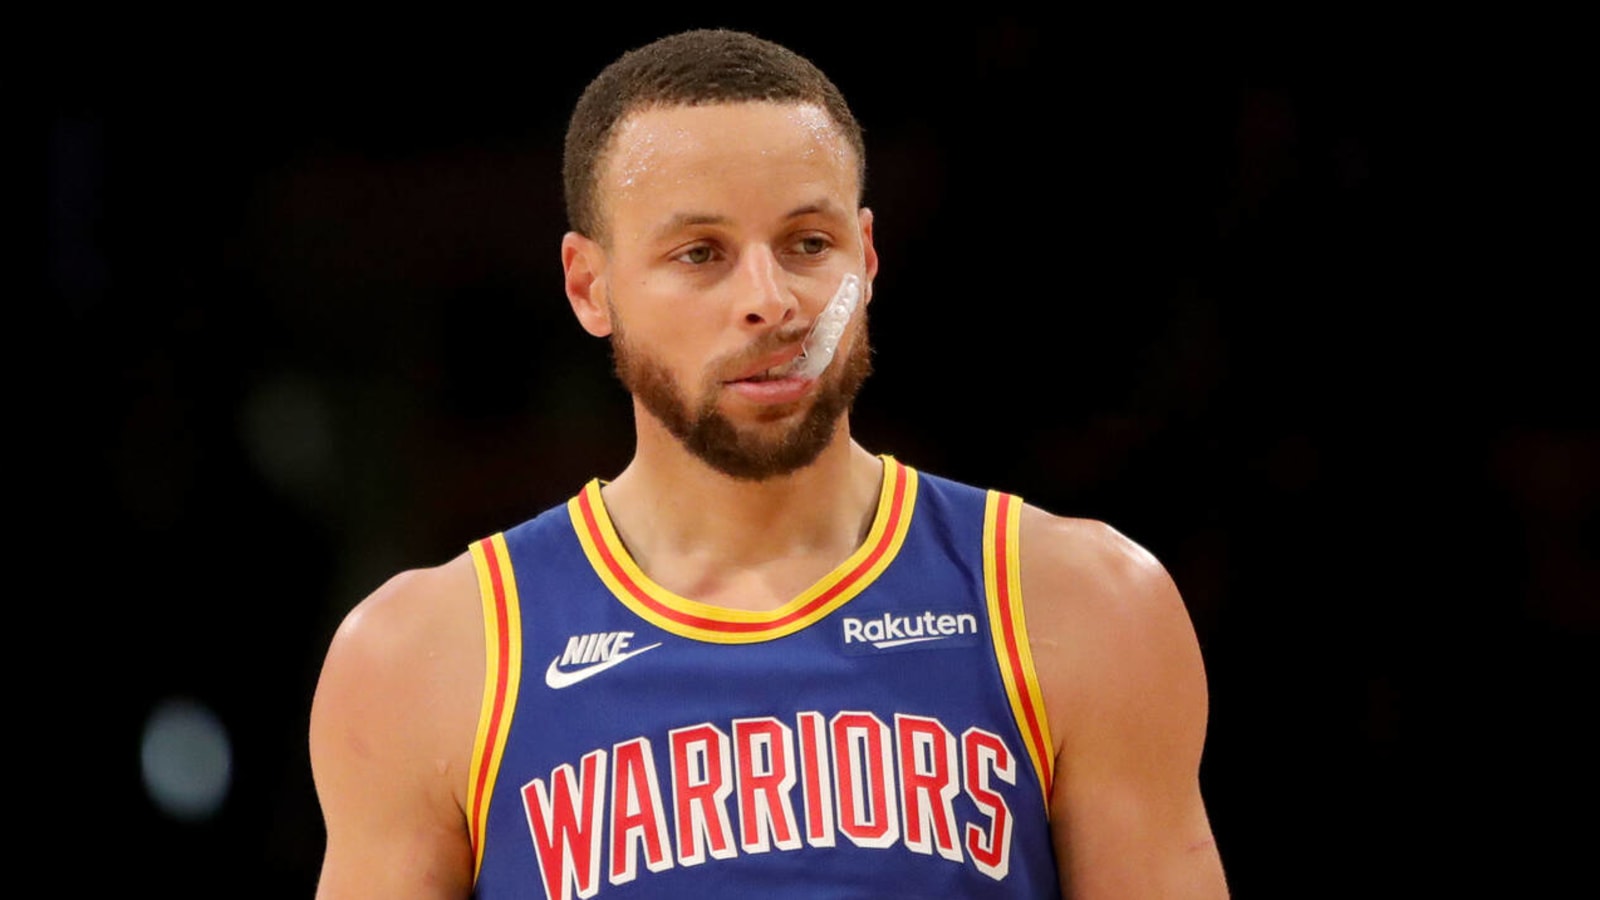 Steph Curry hoping for 'wiggle room' in potential minutes restriction